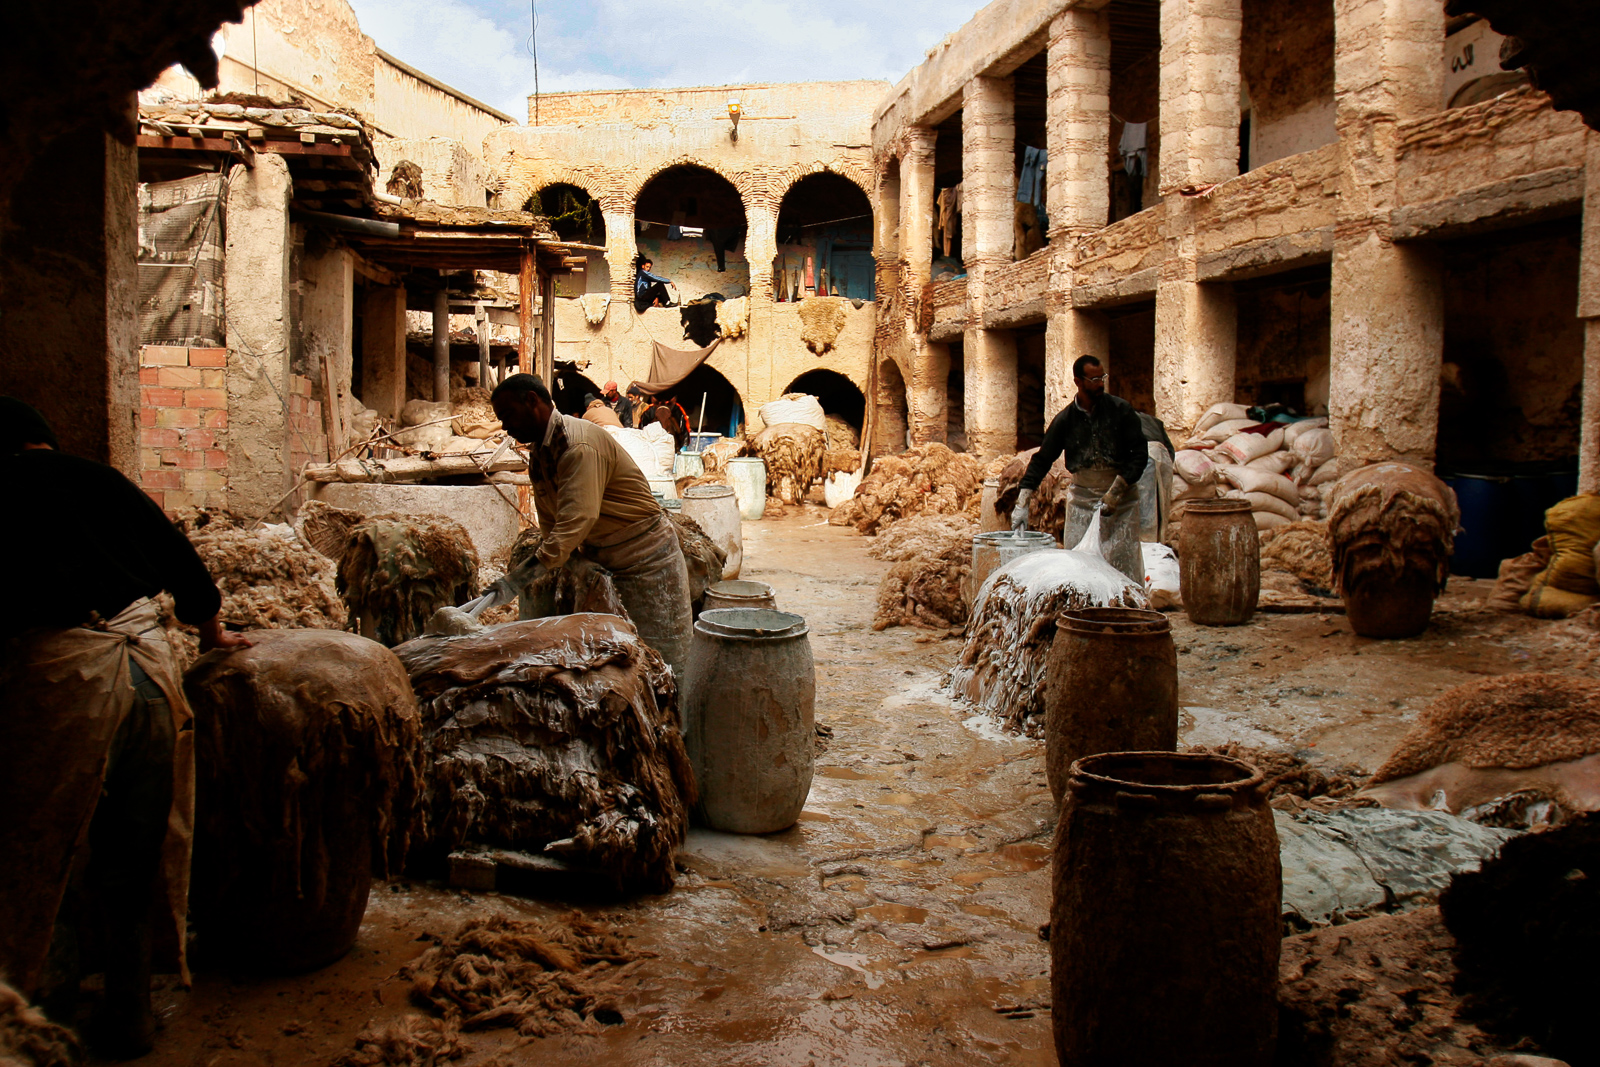 The Tannery, Fes, Morocco